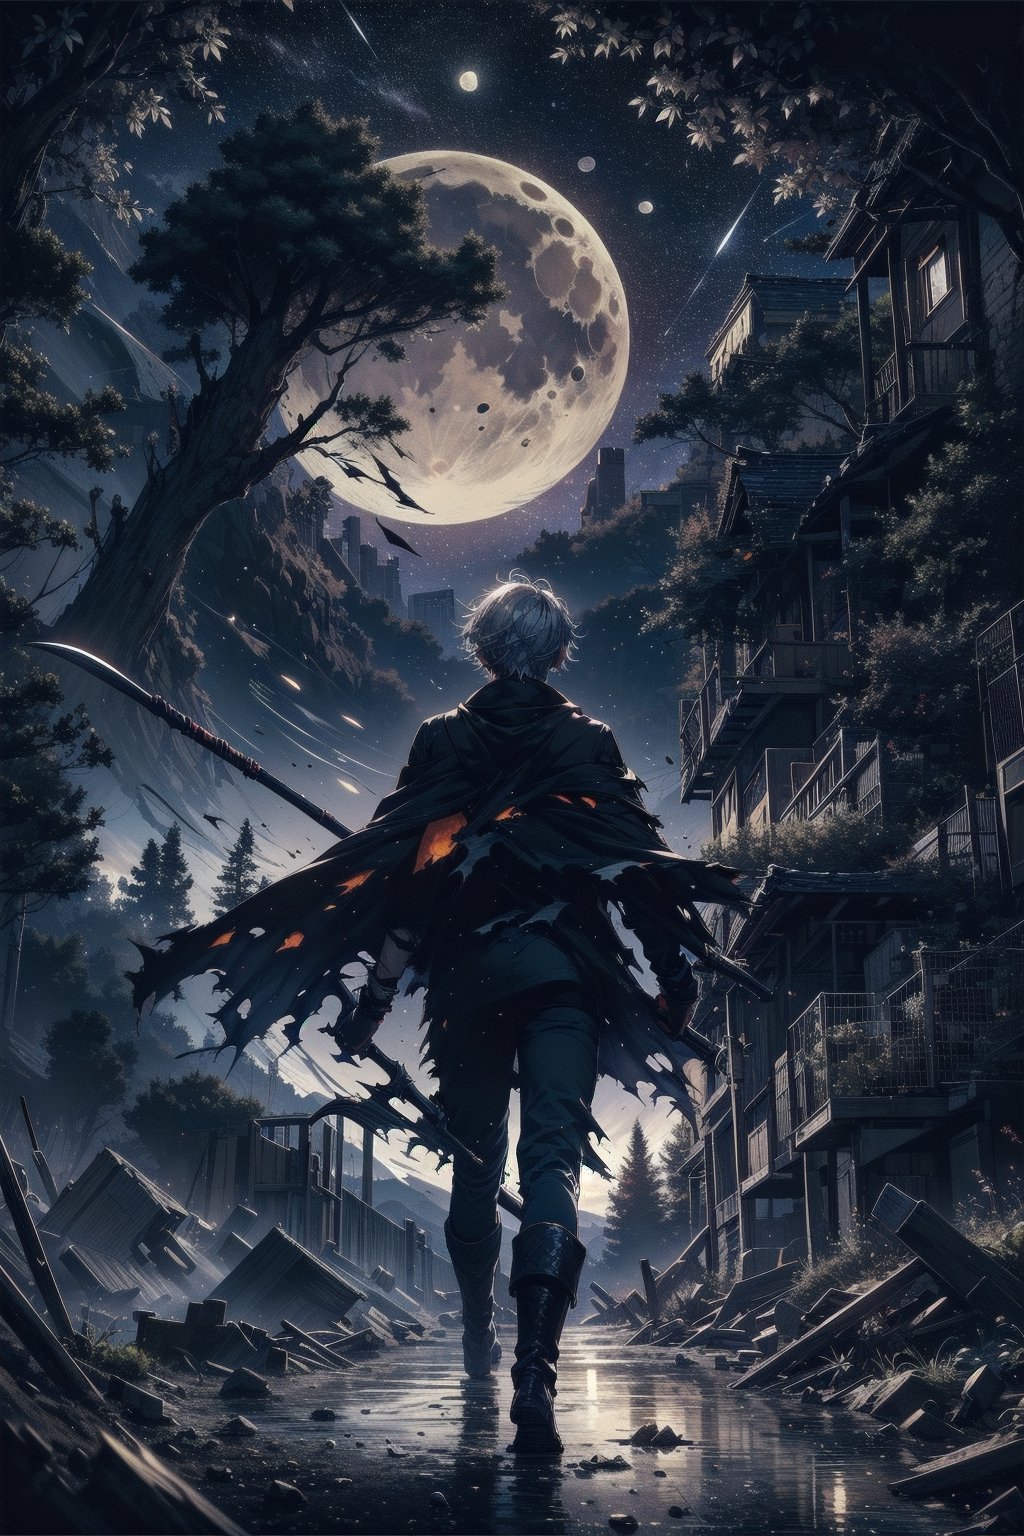 masterpiece, best quality, 1 man, alone, night sky, outdoors, moon, stars, clouds, wind, short silver hair, boots, cape, red eyes, torn clothes, scythe, tree, night,
,ARI1,DArt,Ultra details++ 